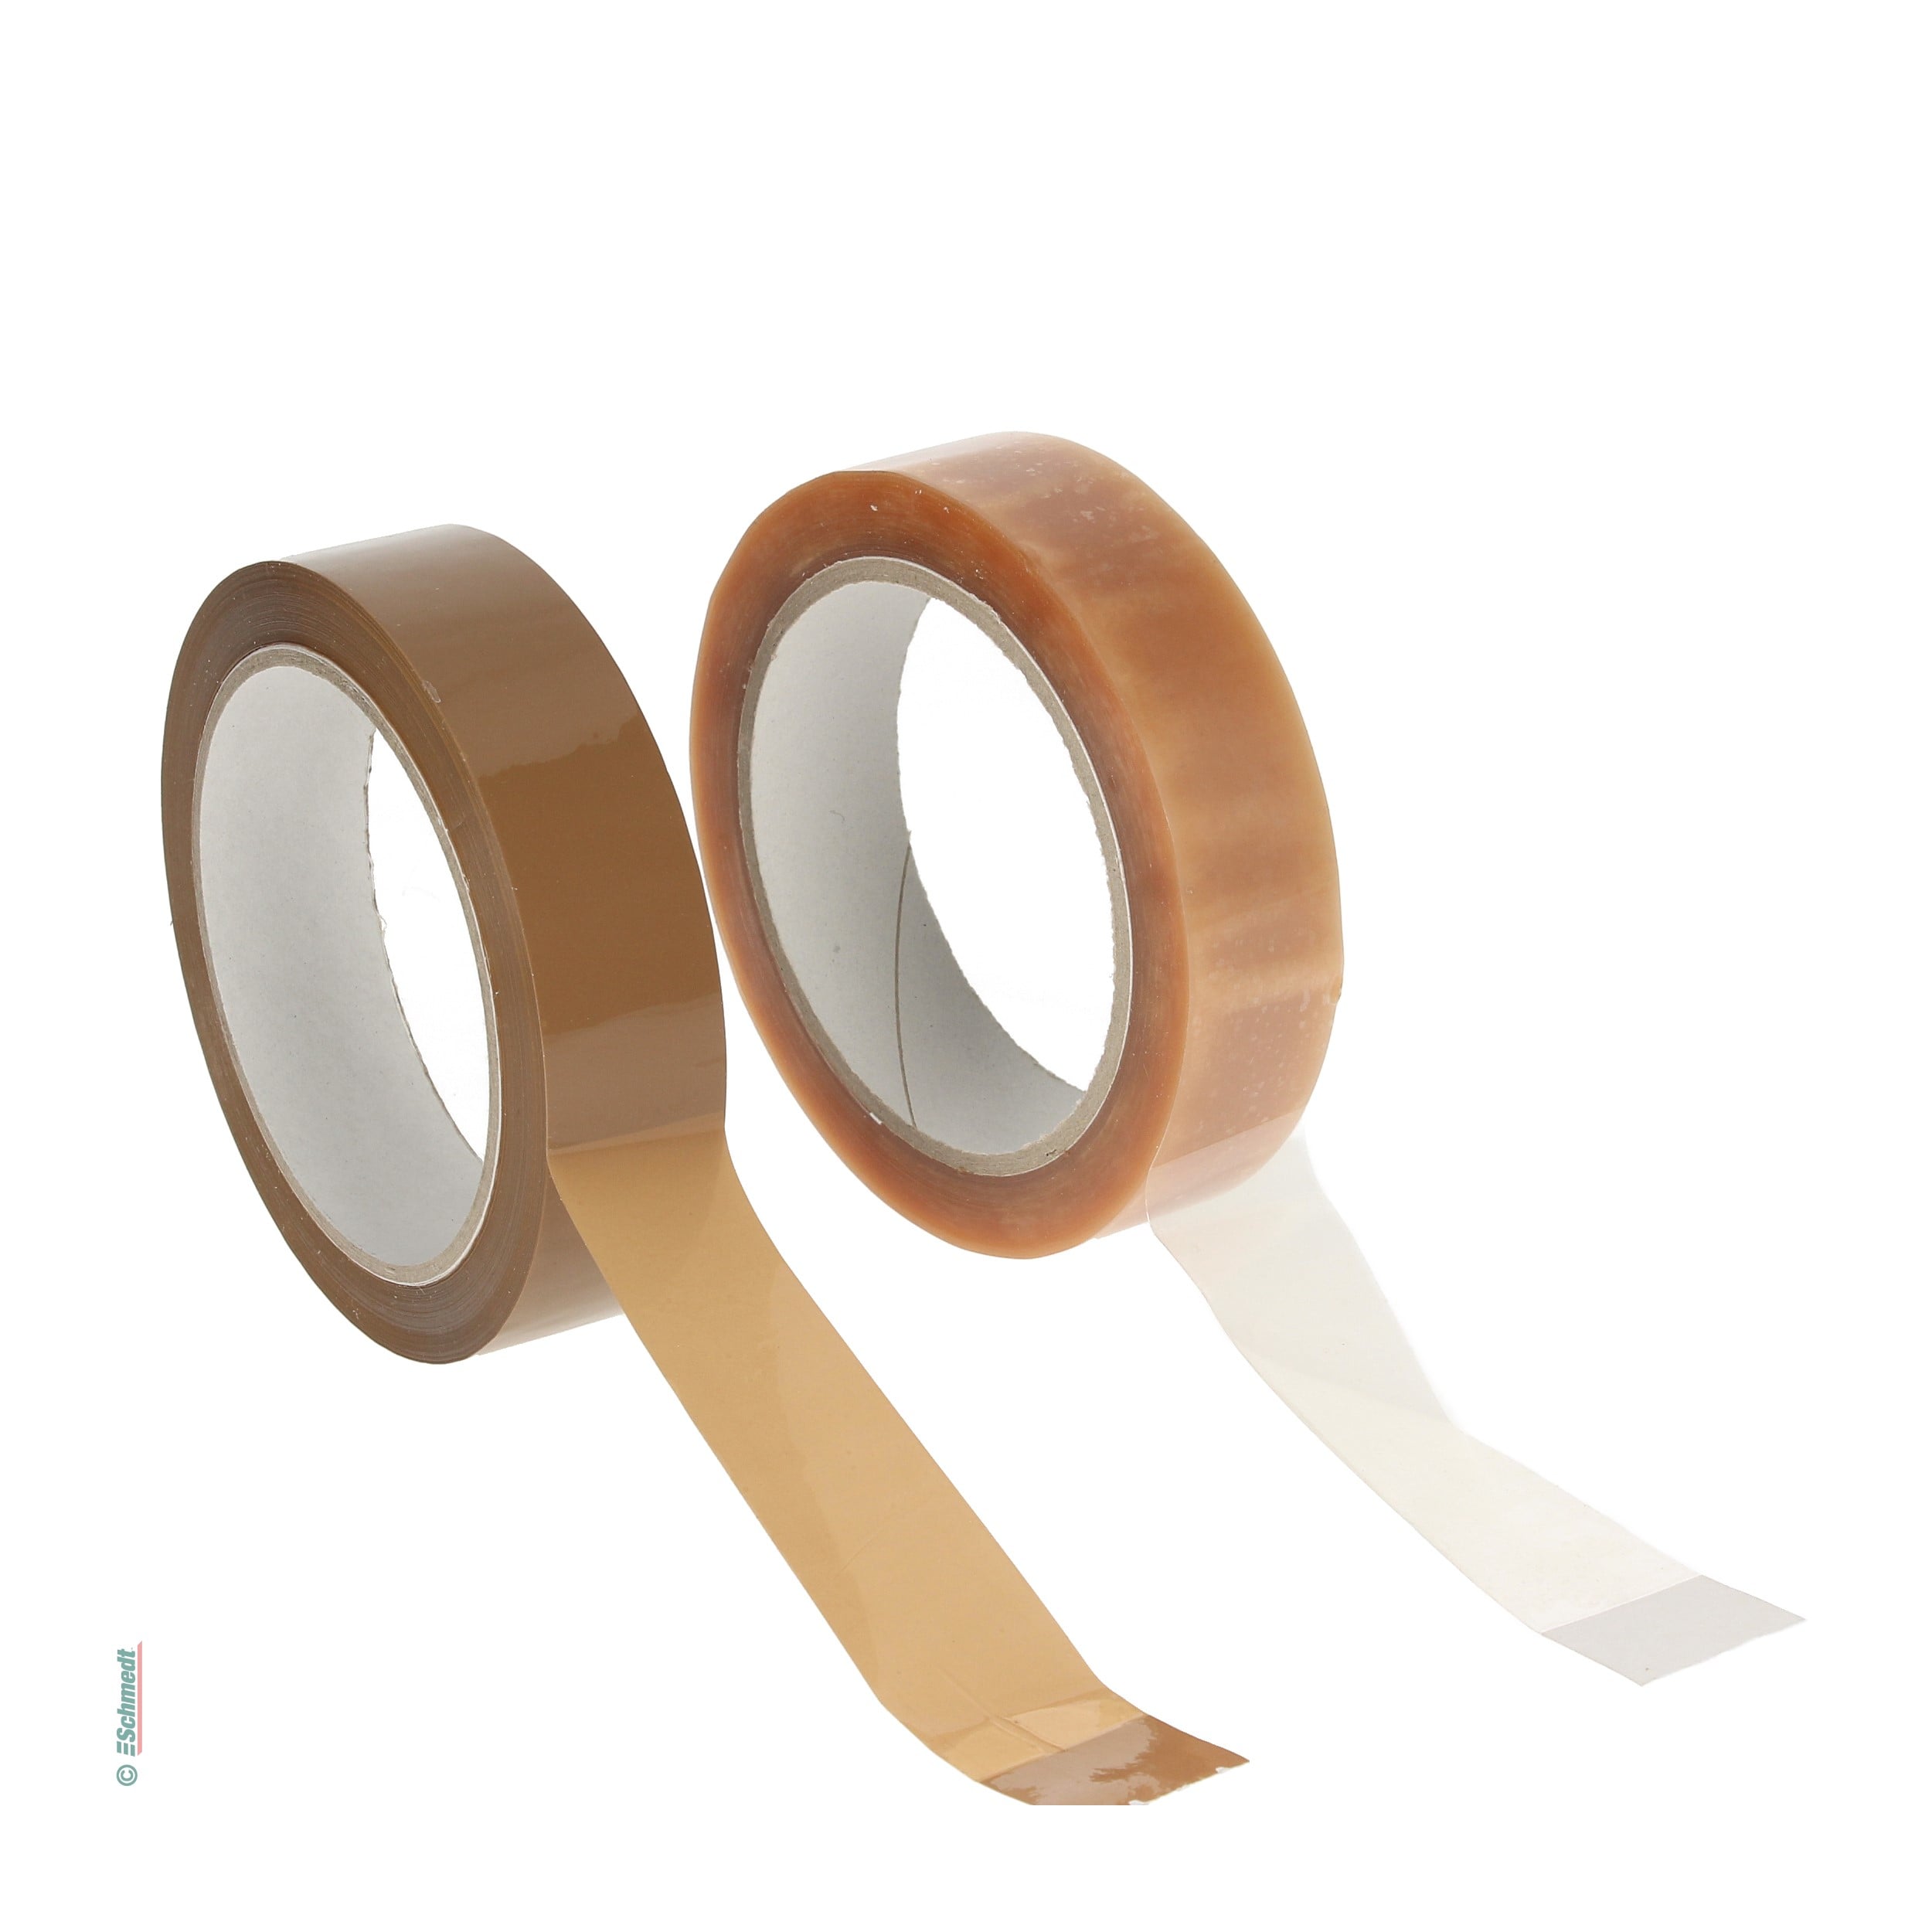 PP packaging tape, self-adhesive - standard quality - sealing of cardboard boxes...